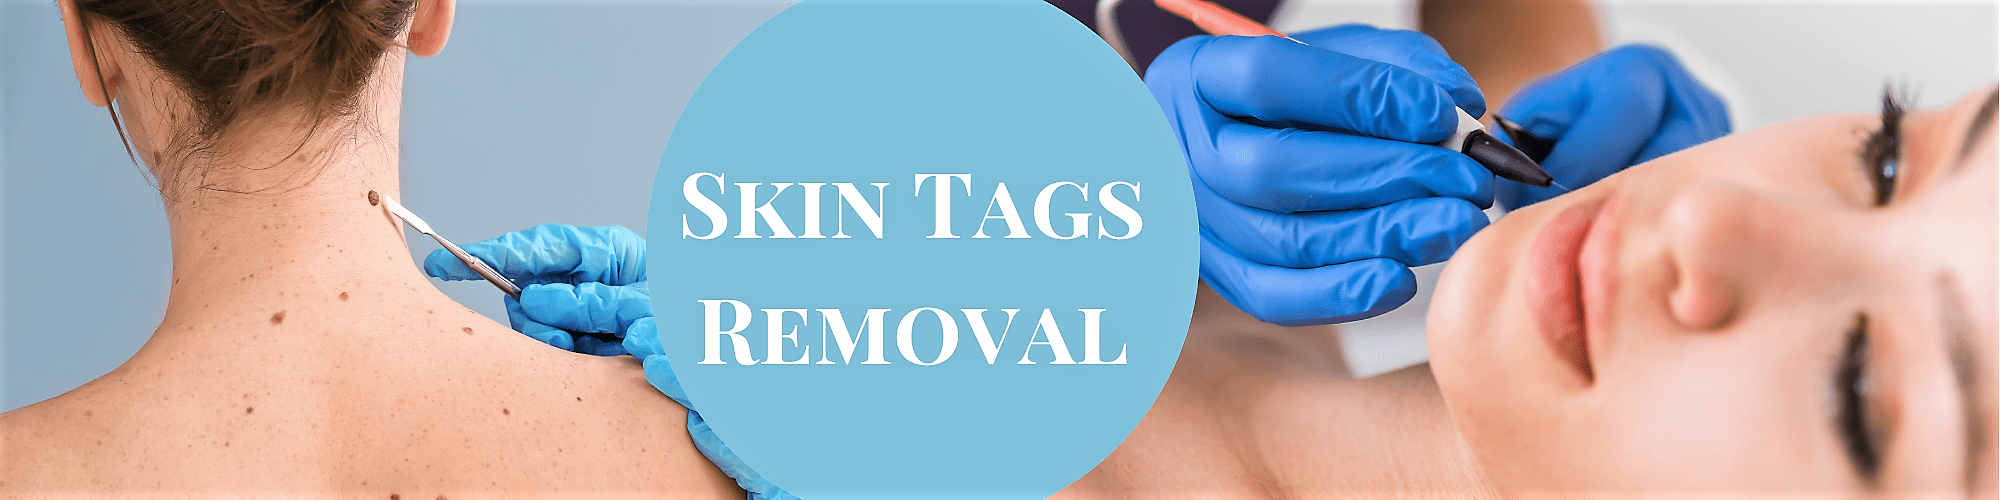 Skin tags removal treatment on the face and body